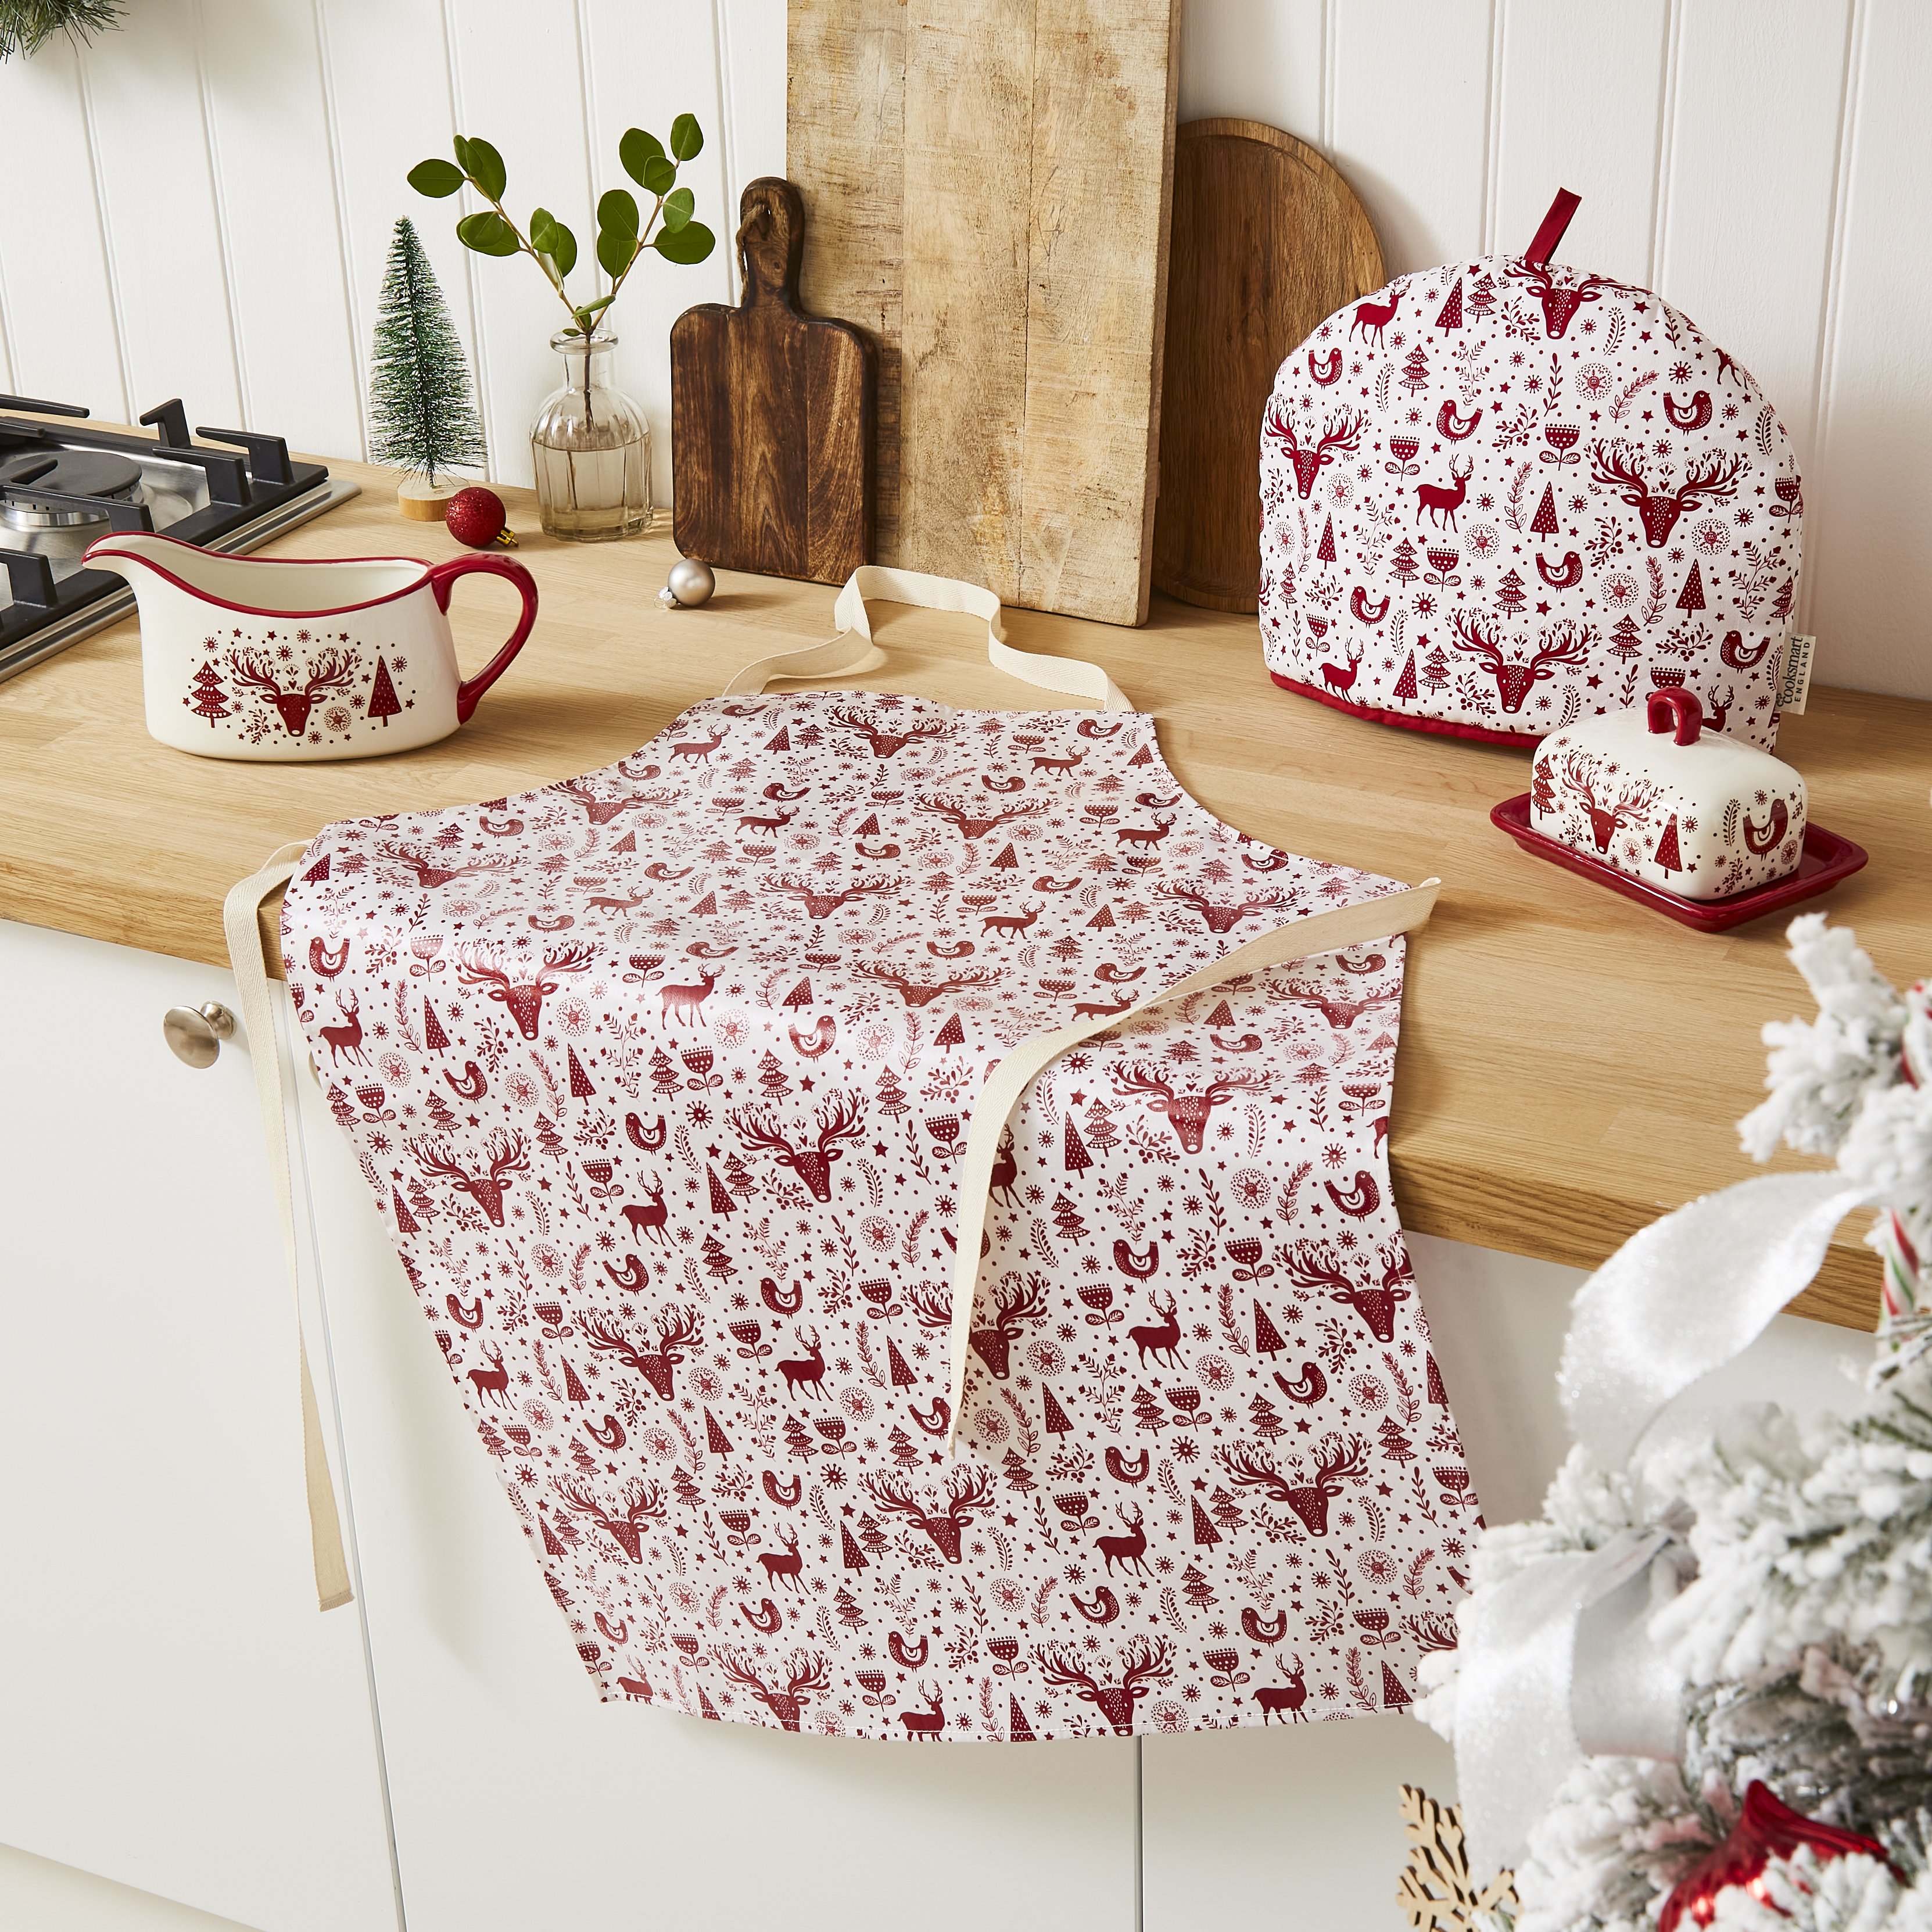 Cooksmart A Nordic Christmas Apron with wipe clean coating